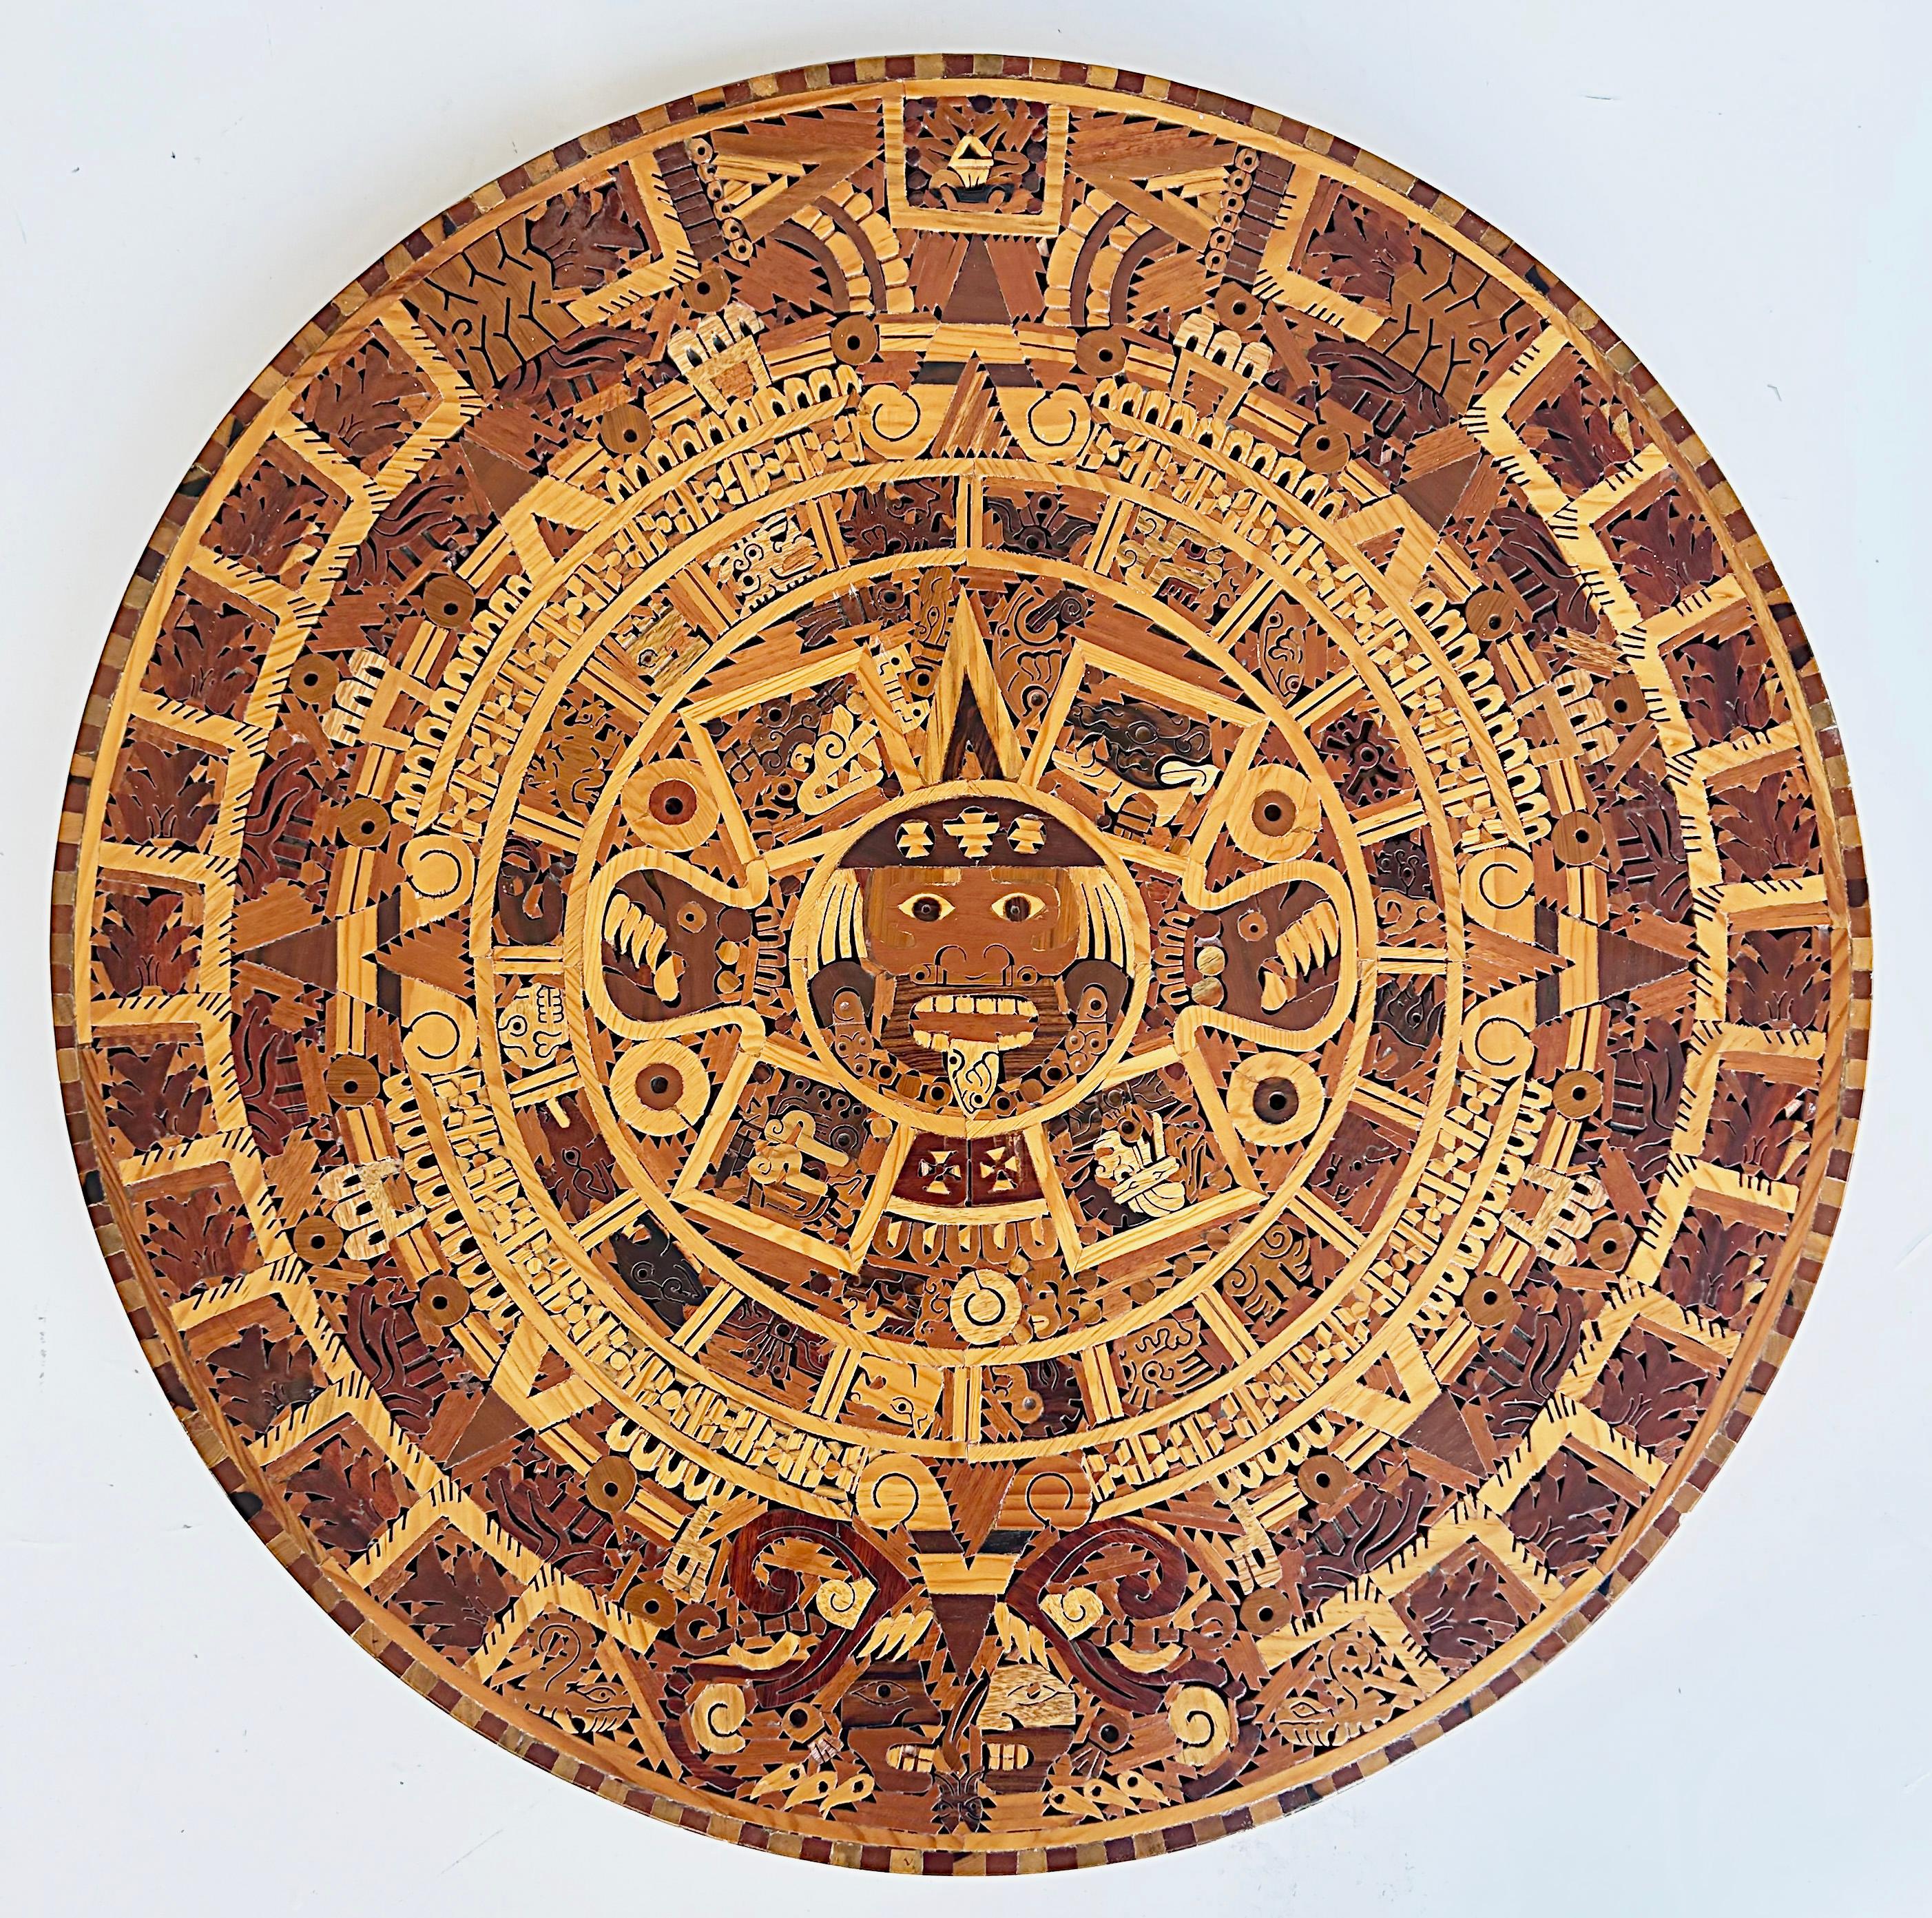 Handmade Mexican Exotic Wood Aztec Calendar Wall Sculpture

Only one is available now.

Offered for sale is an artist-signed handmade tropical exotic hardwood Aztec calendar (Cuauhixalli) sunstone. These intricately made wall sculptures are made